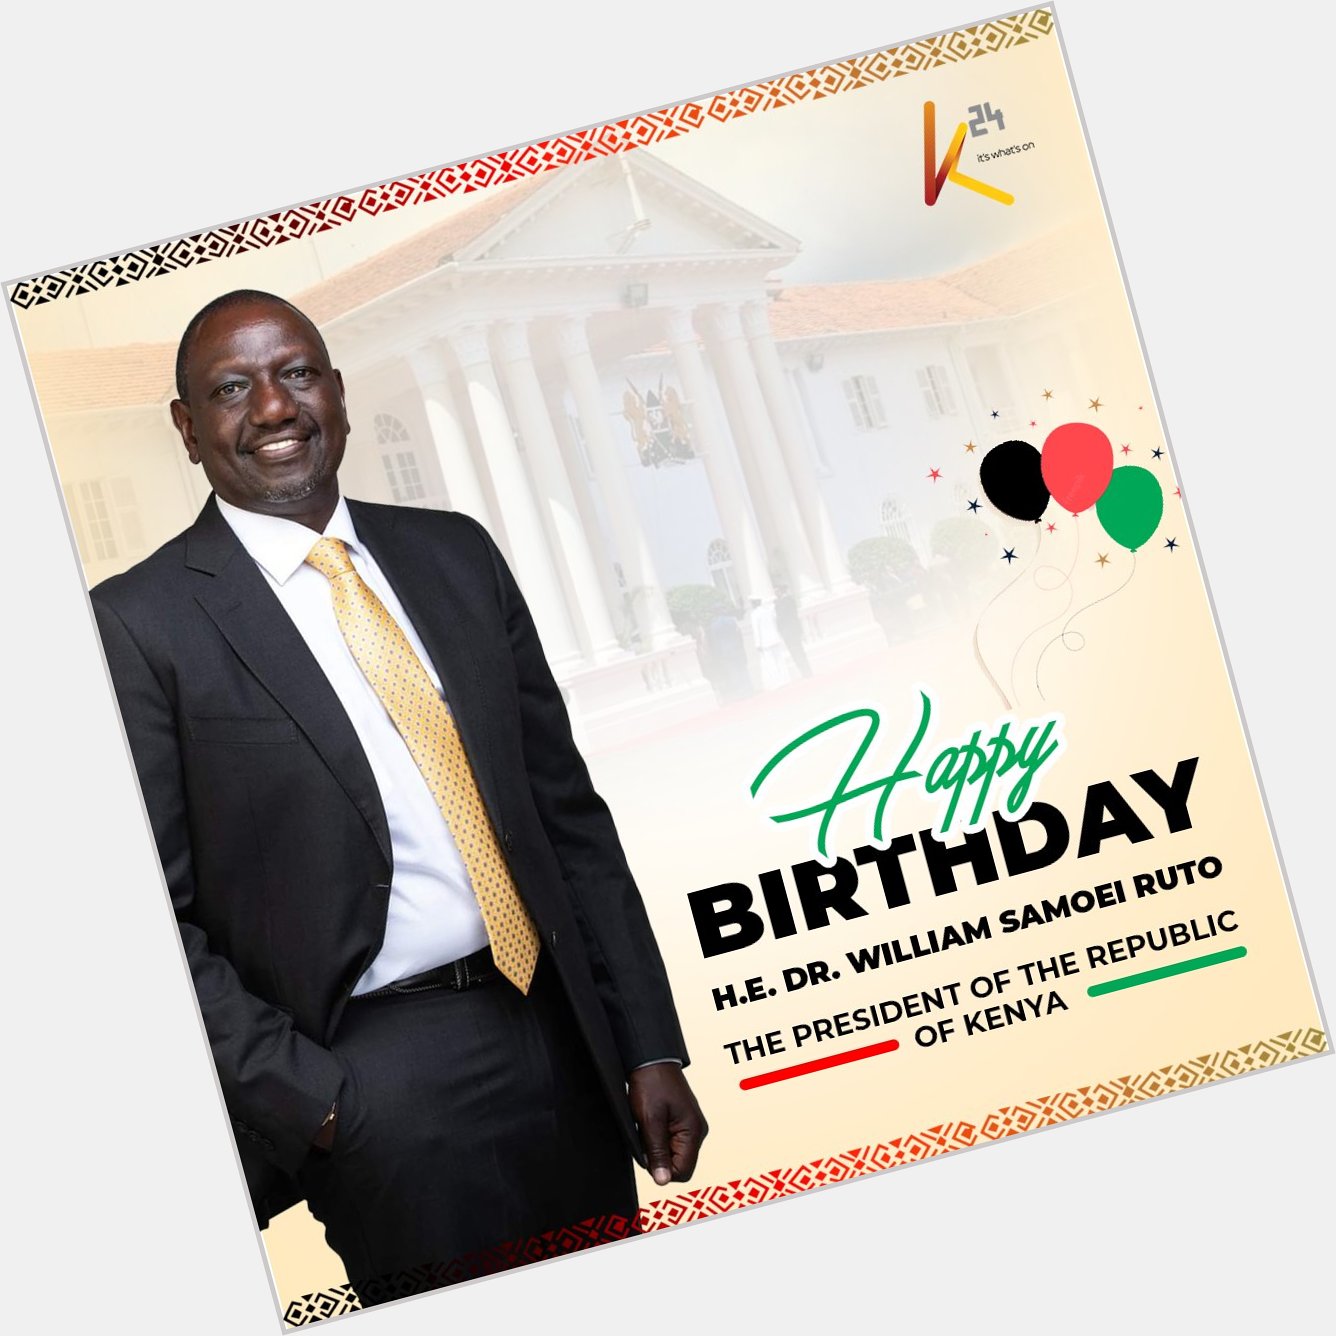 Happy Birthday to President William Ruto.
What would you like to say to him on this special day? 